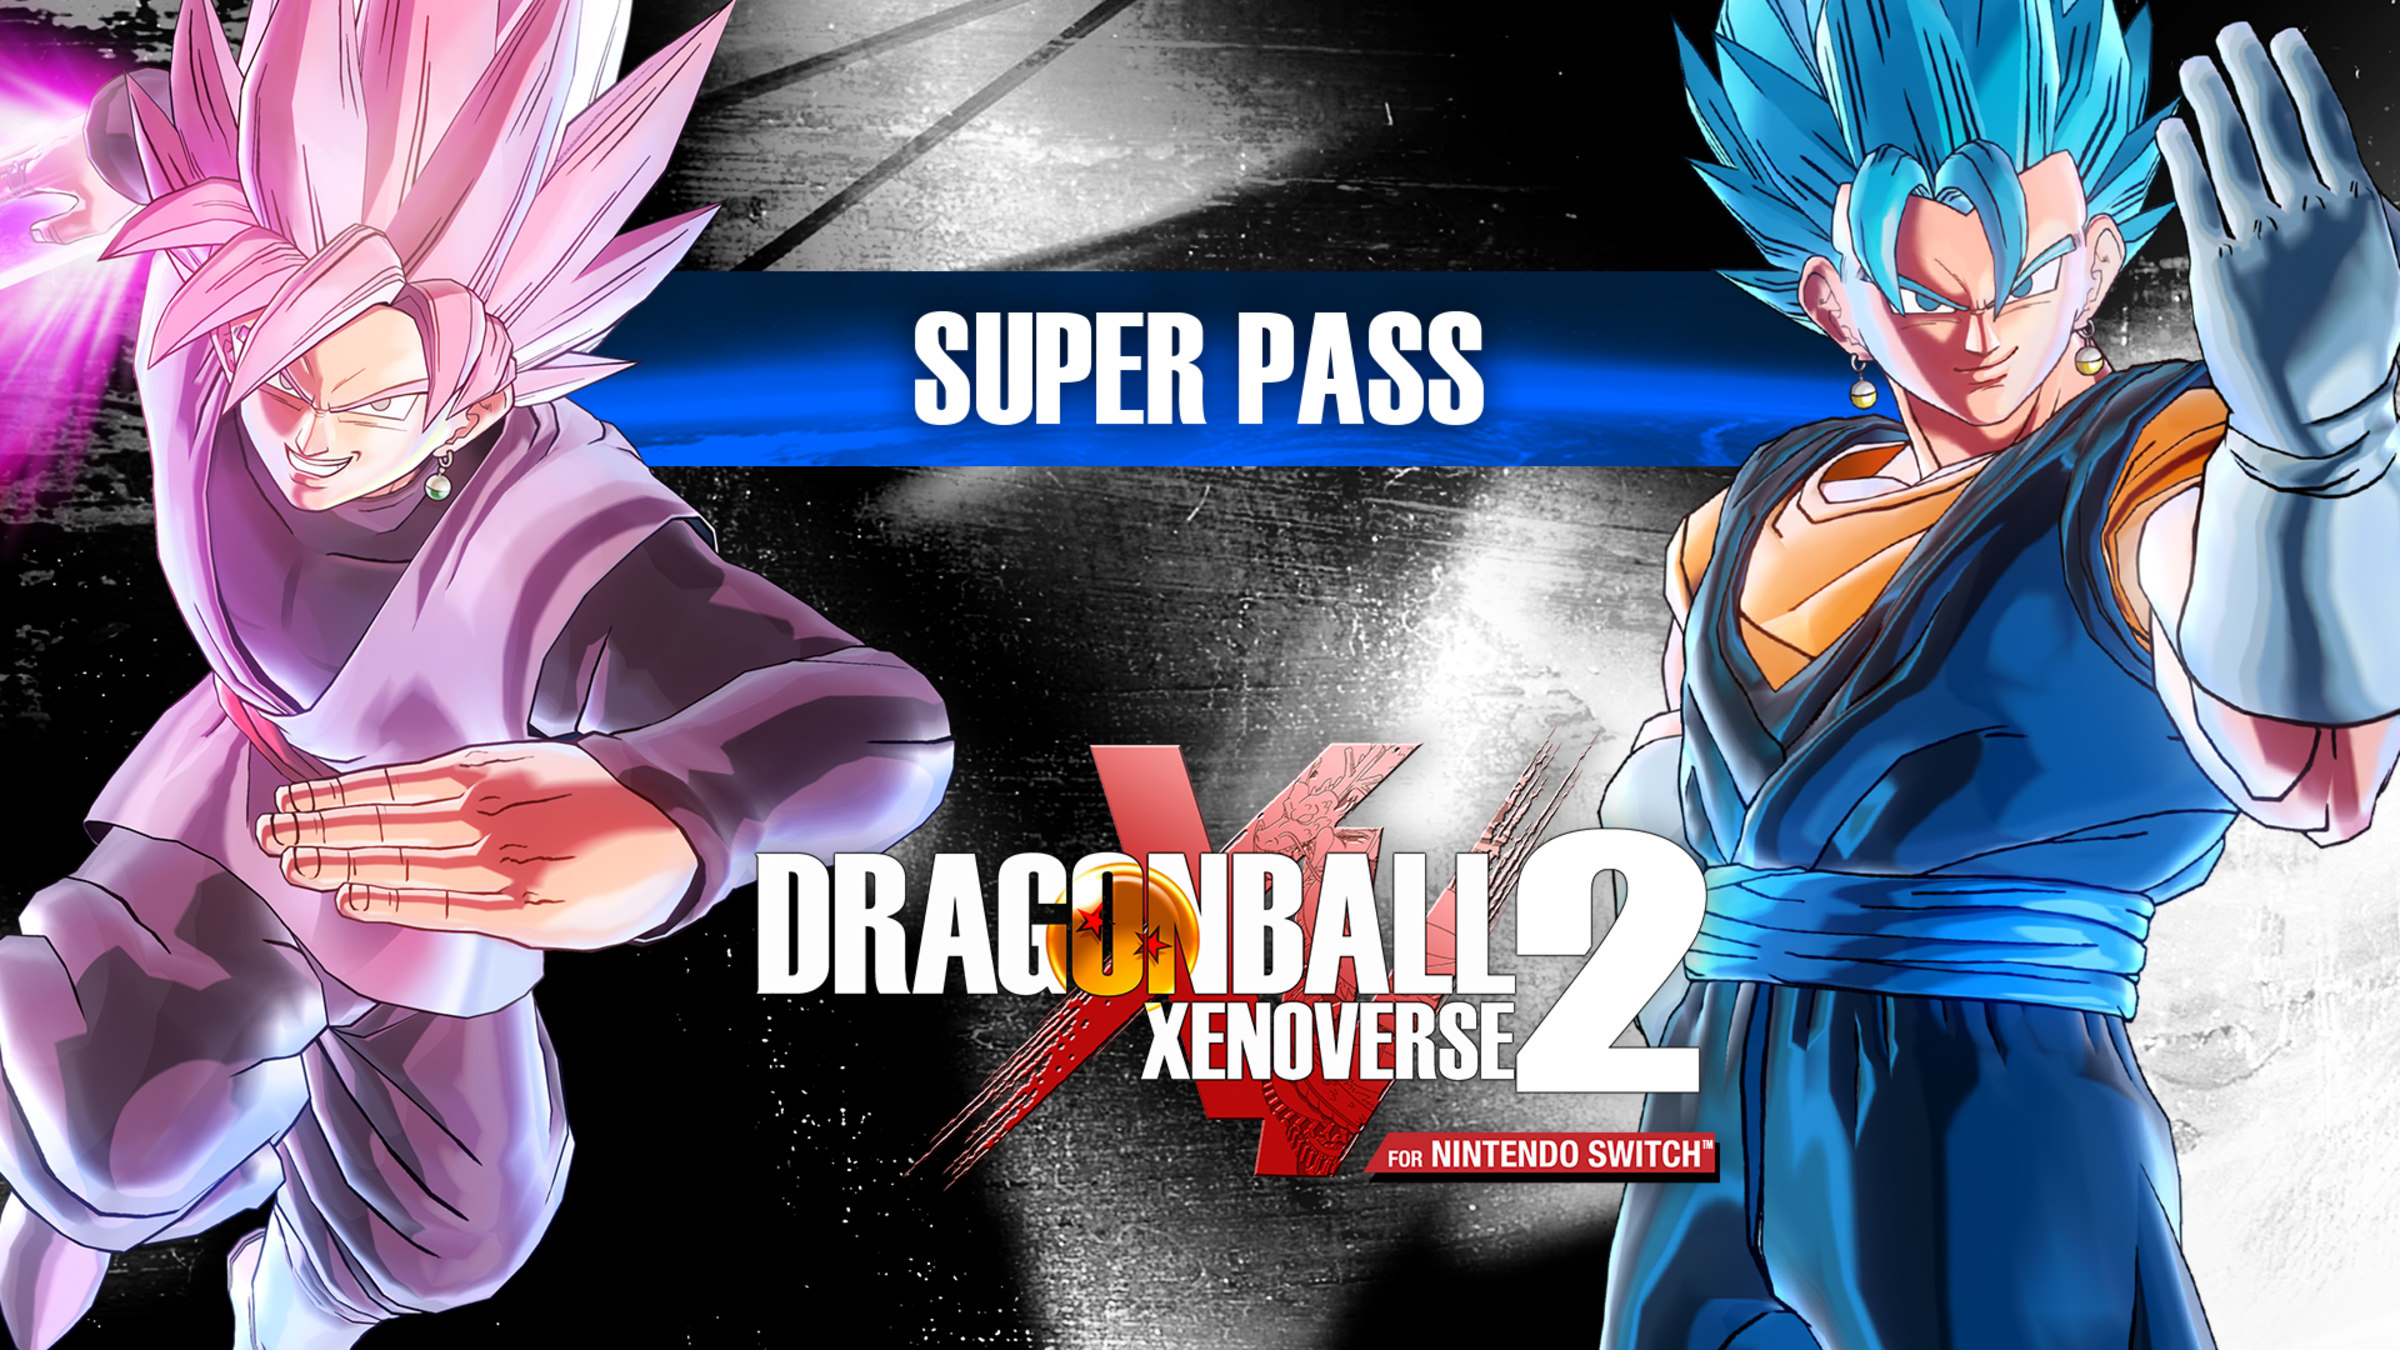 Dragon Ball Xenoverse 2 For Nintendo Switch Gets Release Date - GameSpot